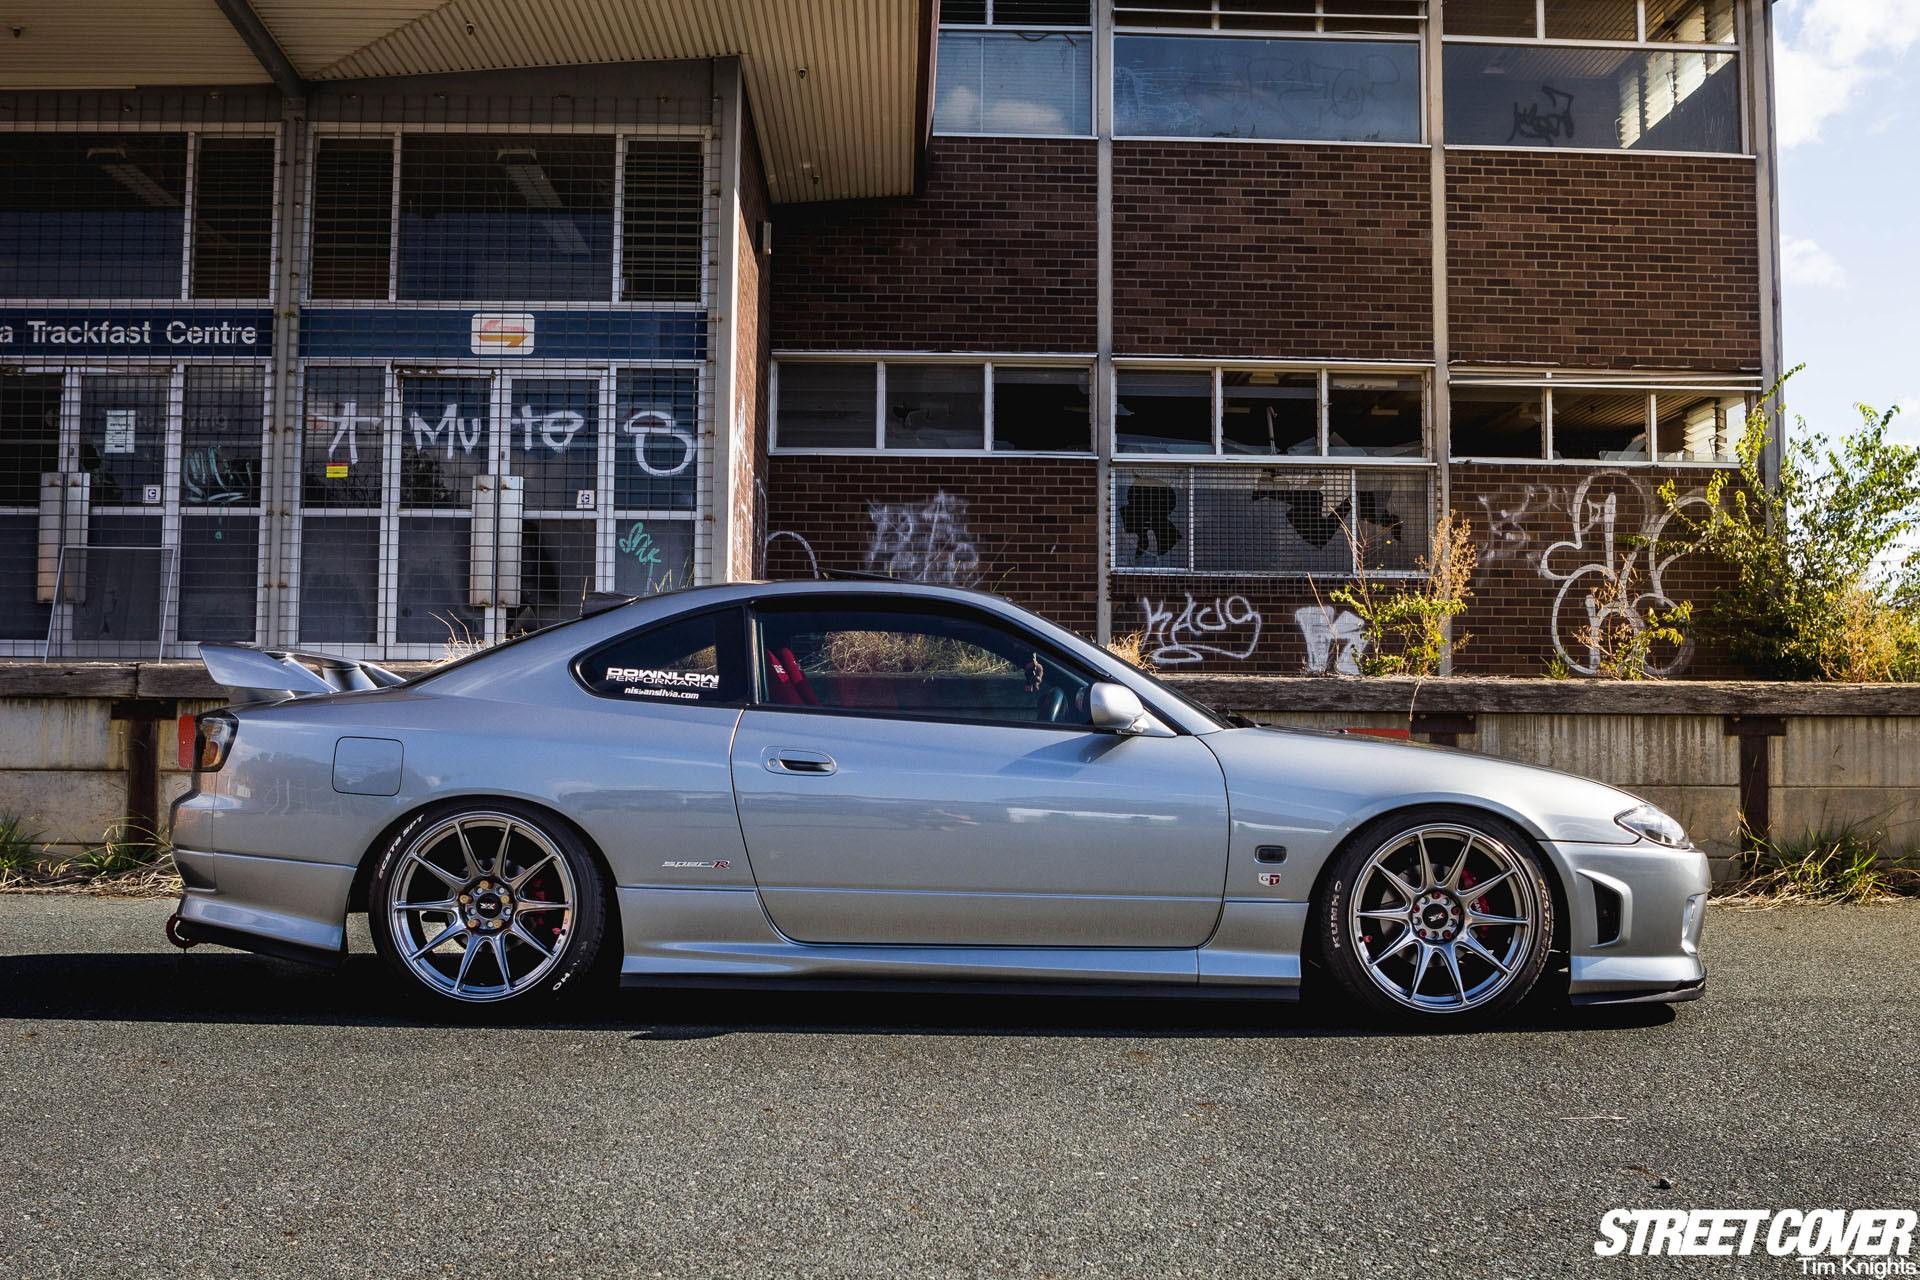 General 1920x1280 Nissan Silvia S15 silver cars sports car Nissan vehicle car side view Japanese cars